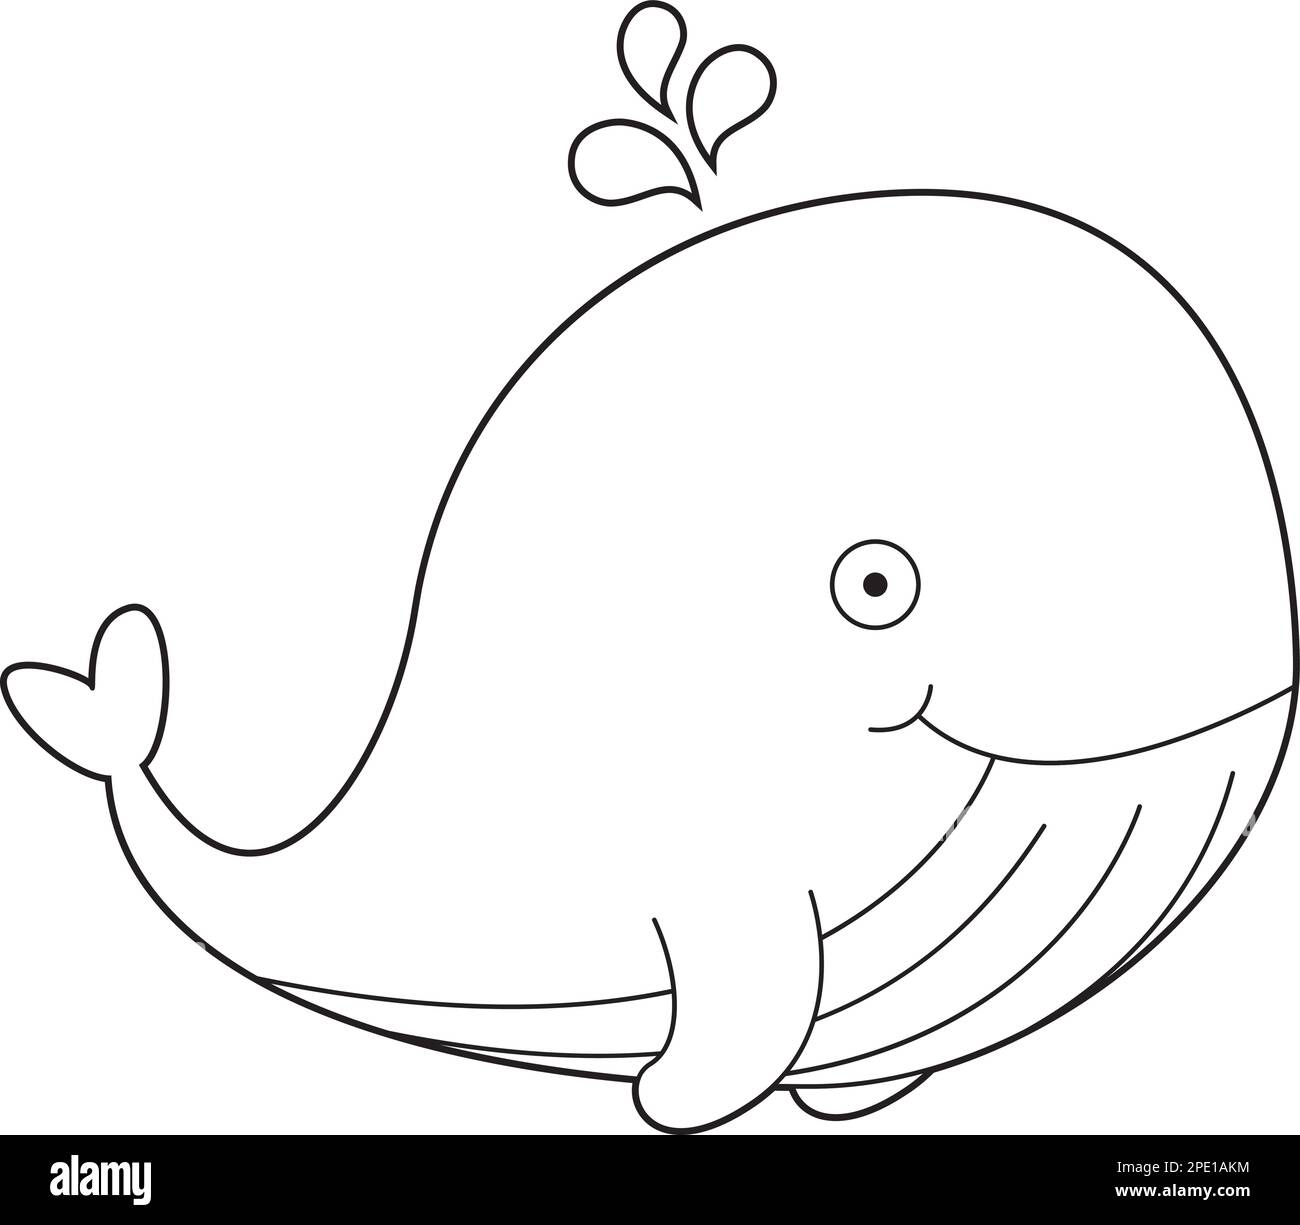 Easy coloring cartoon vector illustration of a whale Stock Vector